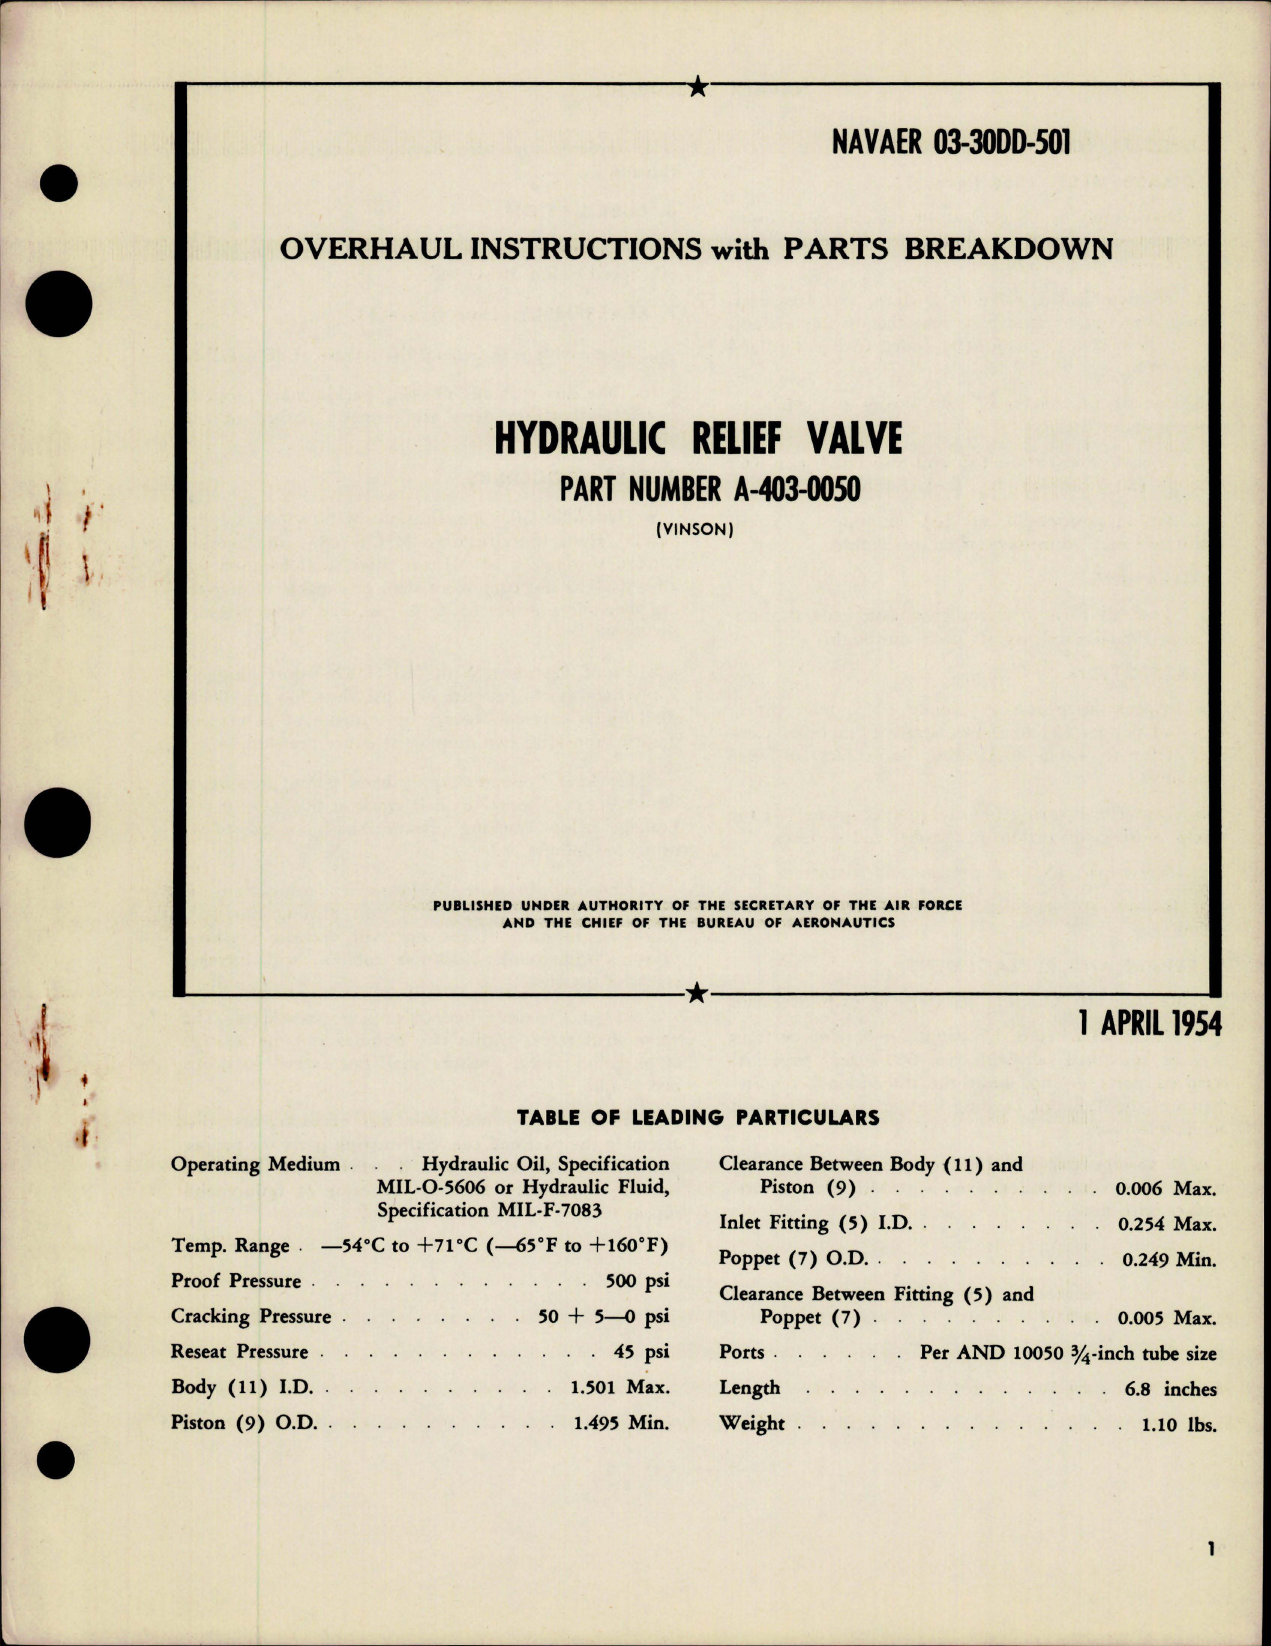 Sample page 1 from AirCorps Library document: Overhaul Instructions with Parts Breakdown for Hydraulic Relief Valve - Part A-403-0050 